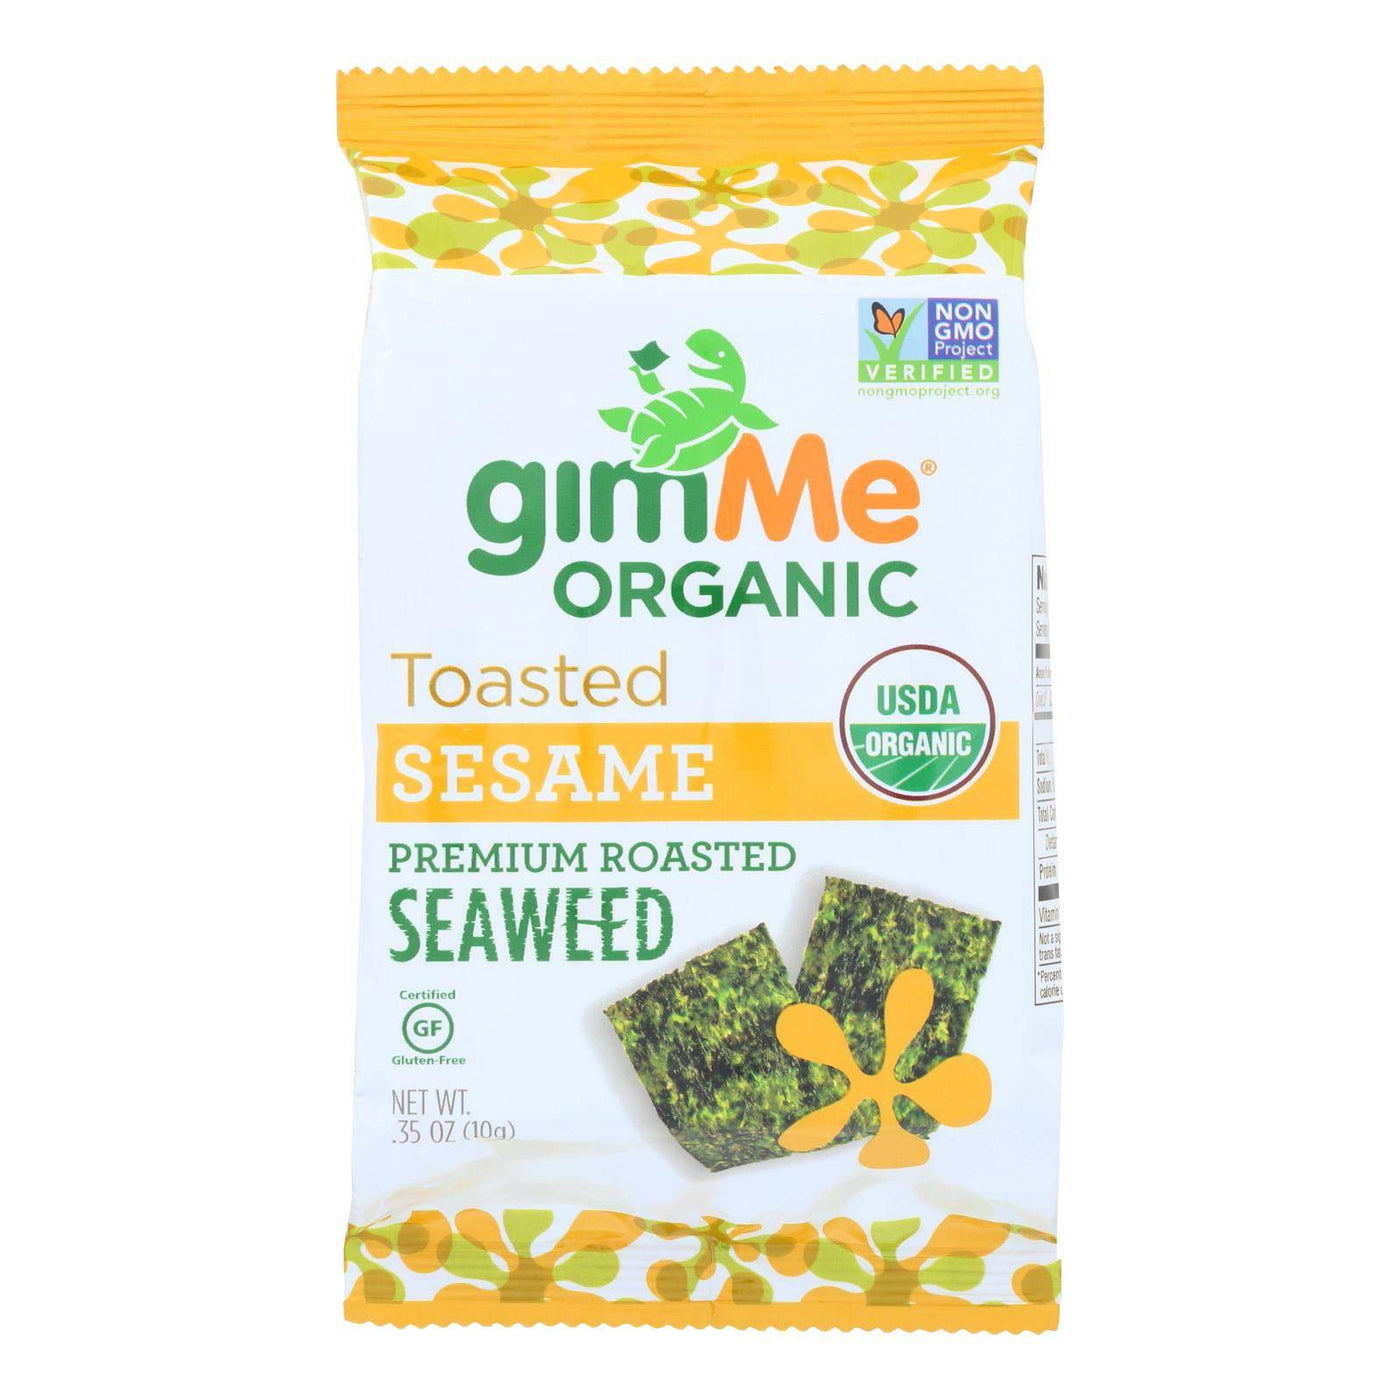 Buy Gimme Organic Roasted - Sesame - Case Of 12 - 0.35 Oz.  at OnlyNaturals.us